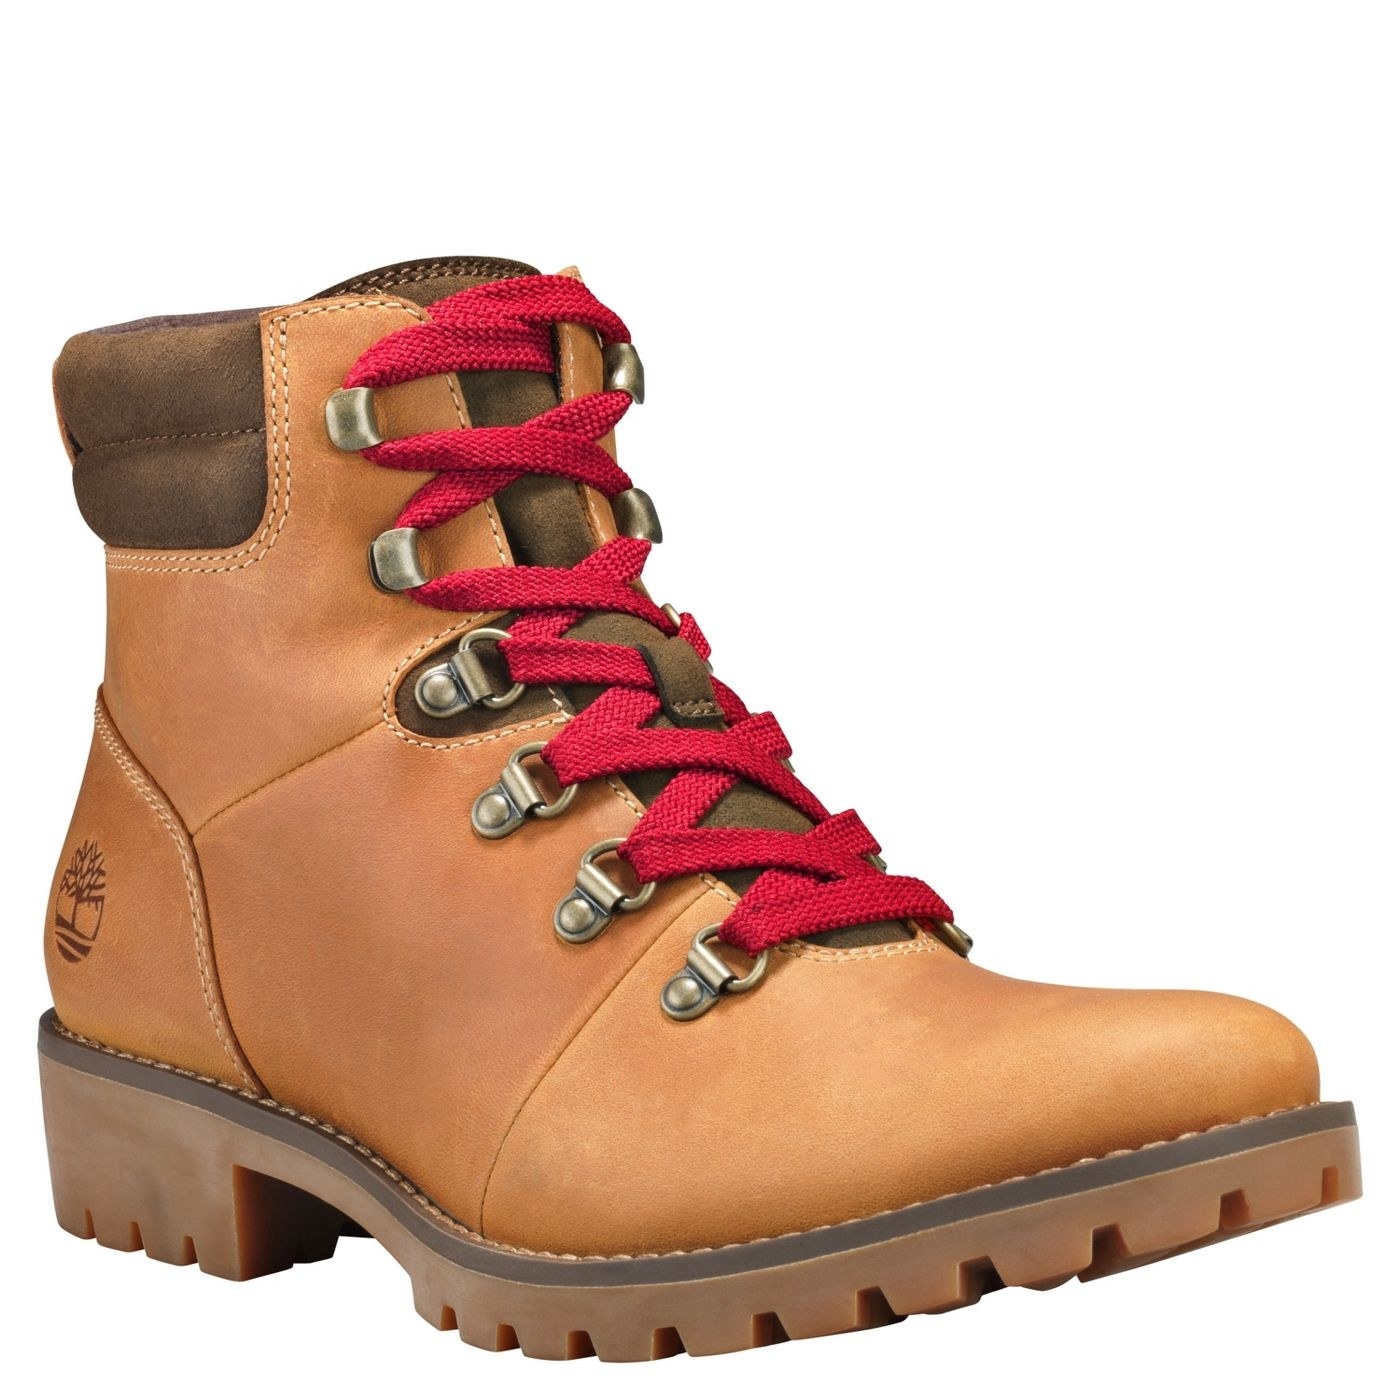 tan Timberland hiking boots with red laces